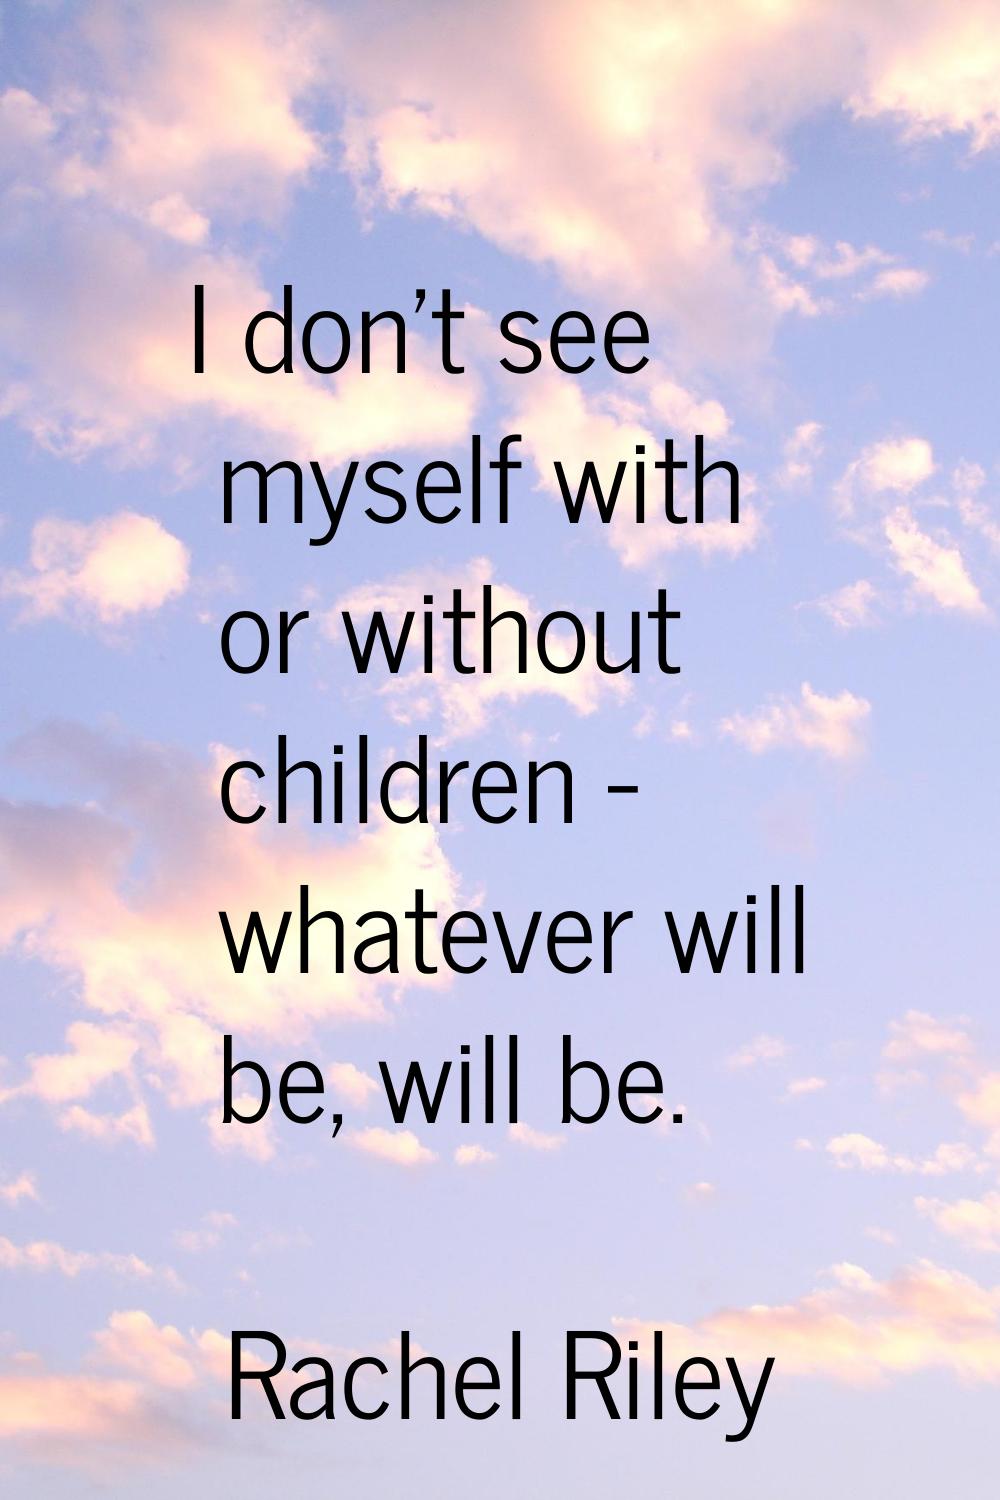 I don't see myself with or without children - whatever will be, will be.